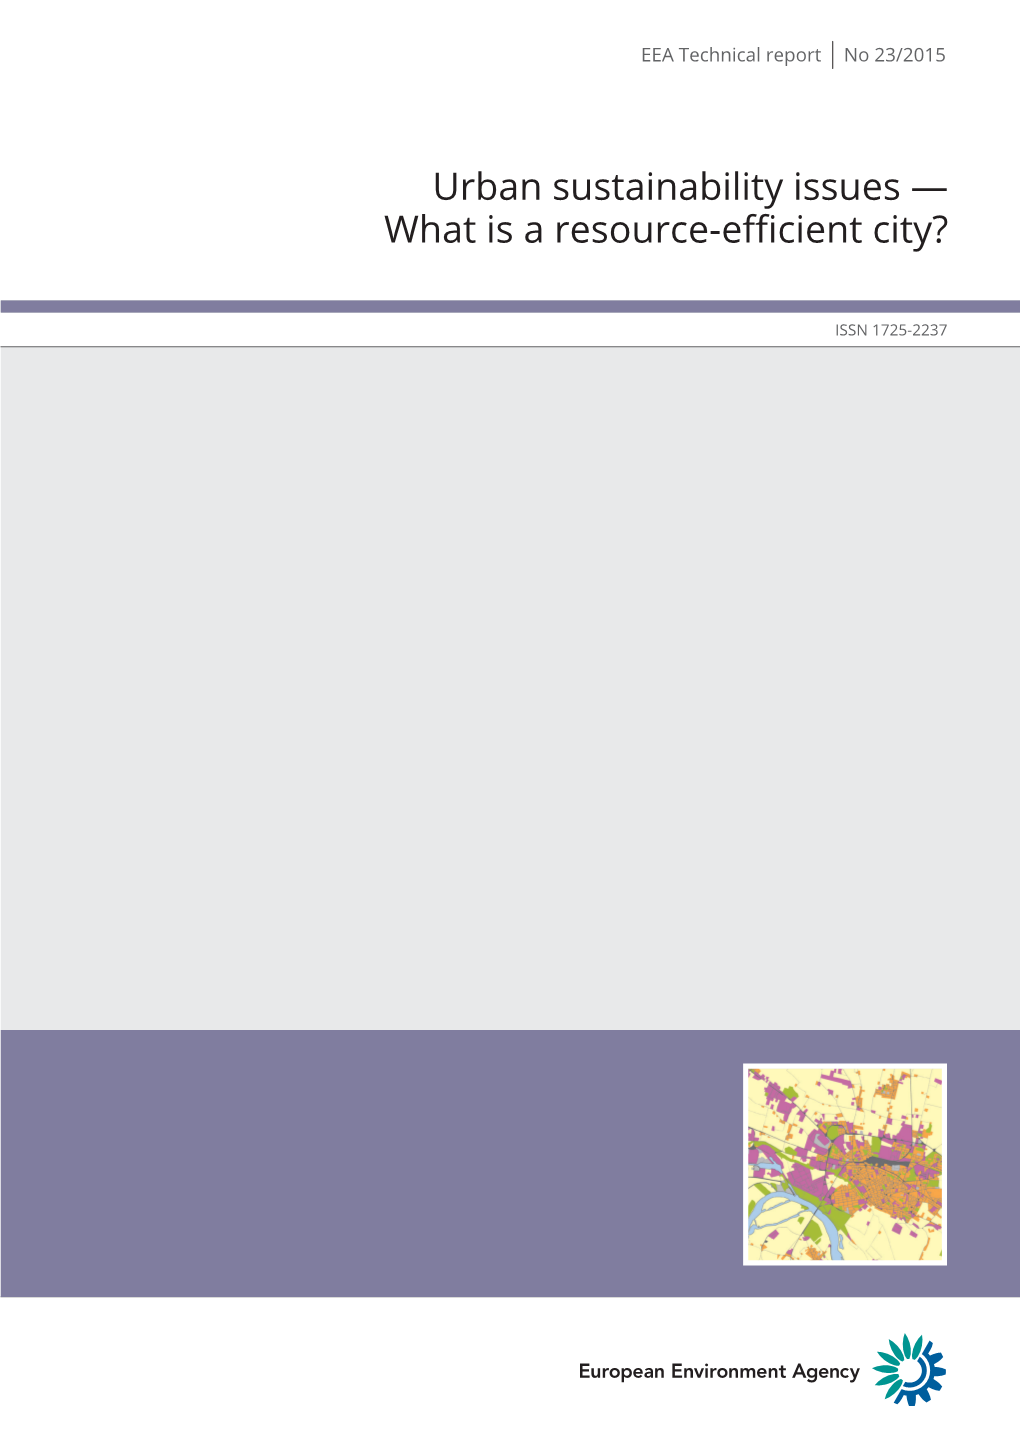 Urban Sustainability Issues — What Is a Resource-Efficient City?